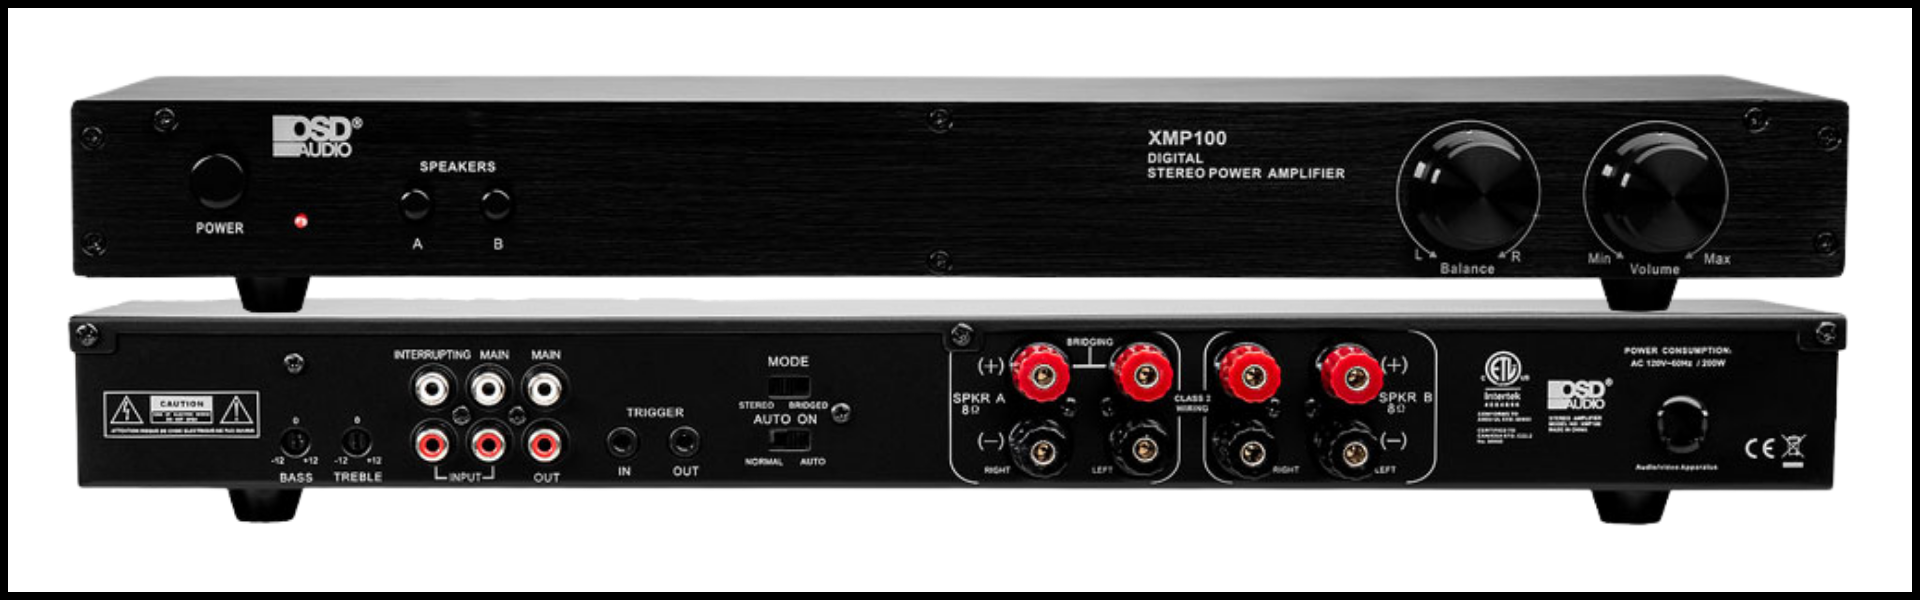 An image showcasing the front and back of the XMP100 Power Amplifier